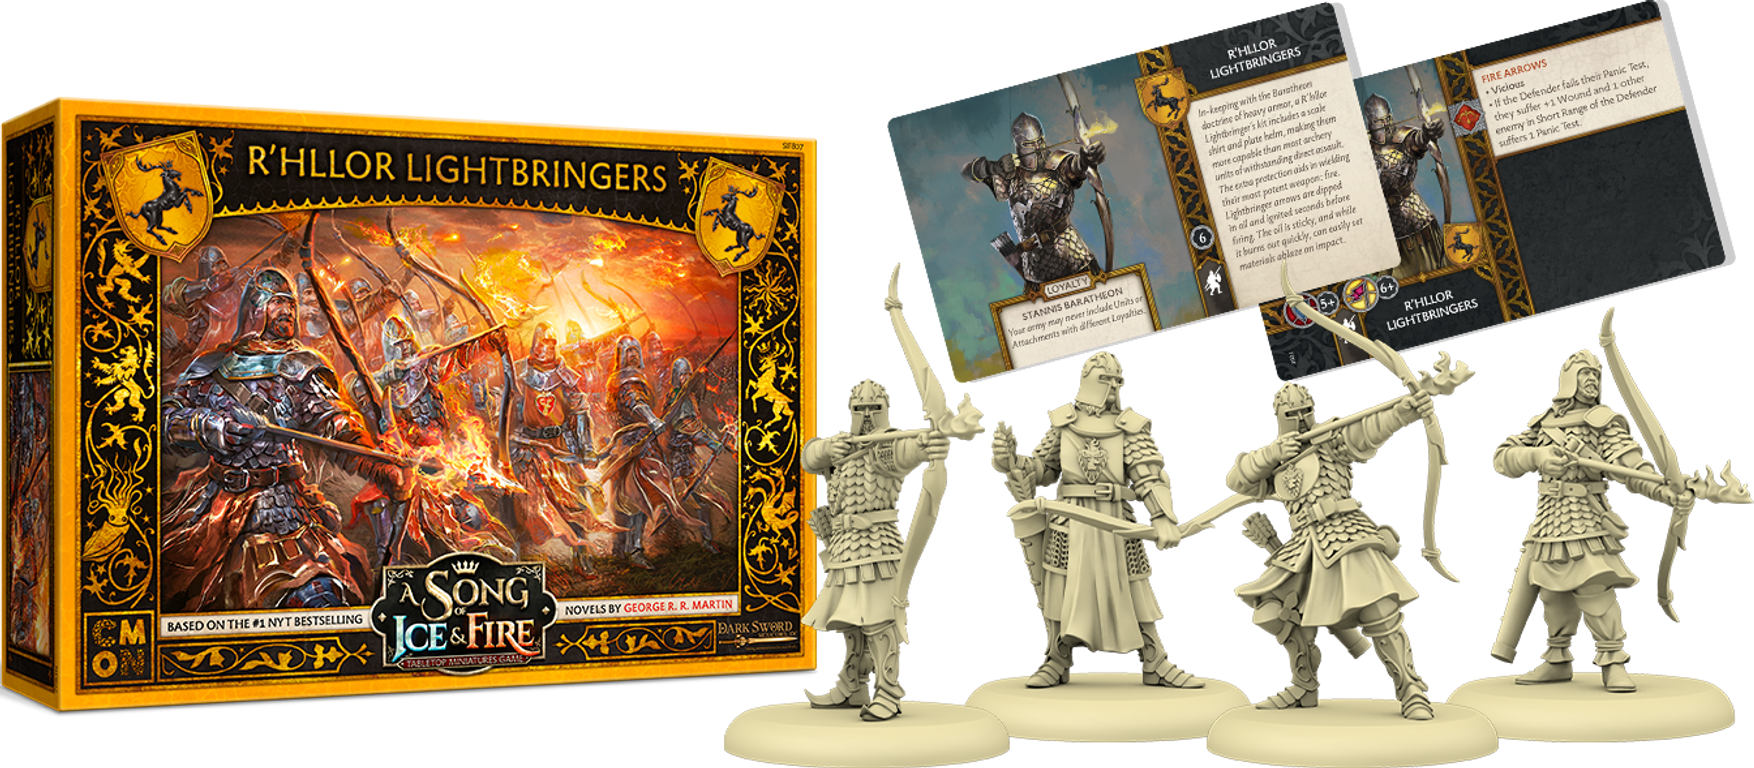 A Song of Ice & Fire: Tabletop Miniatures Game – R'hllor Lightbringers componenten